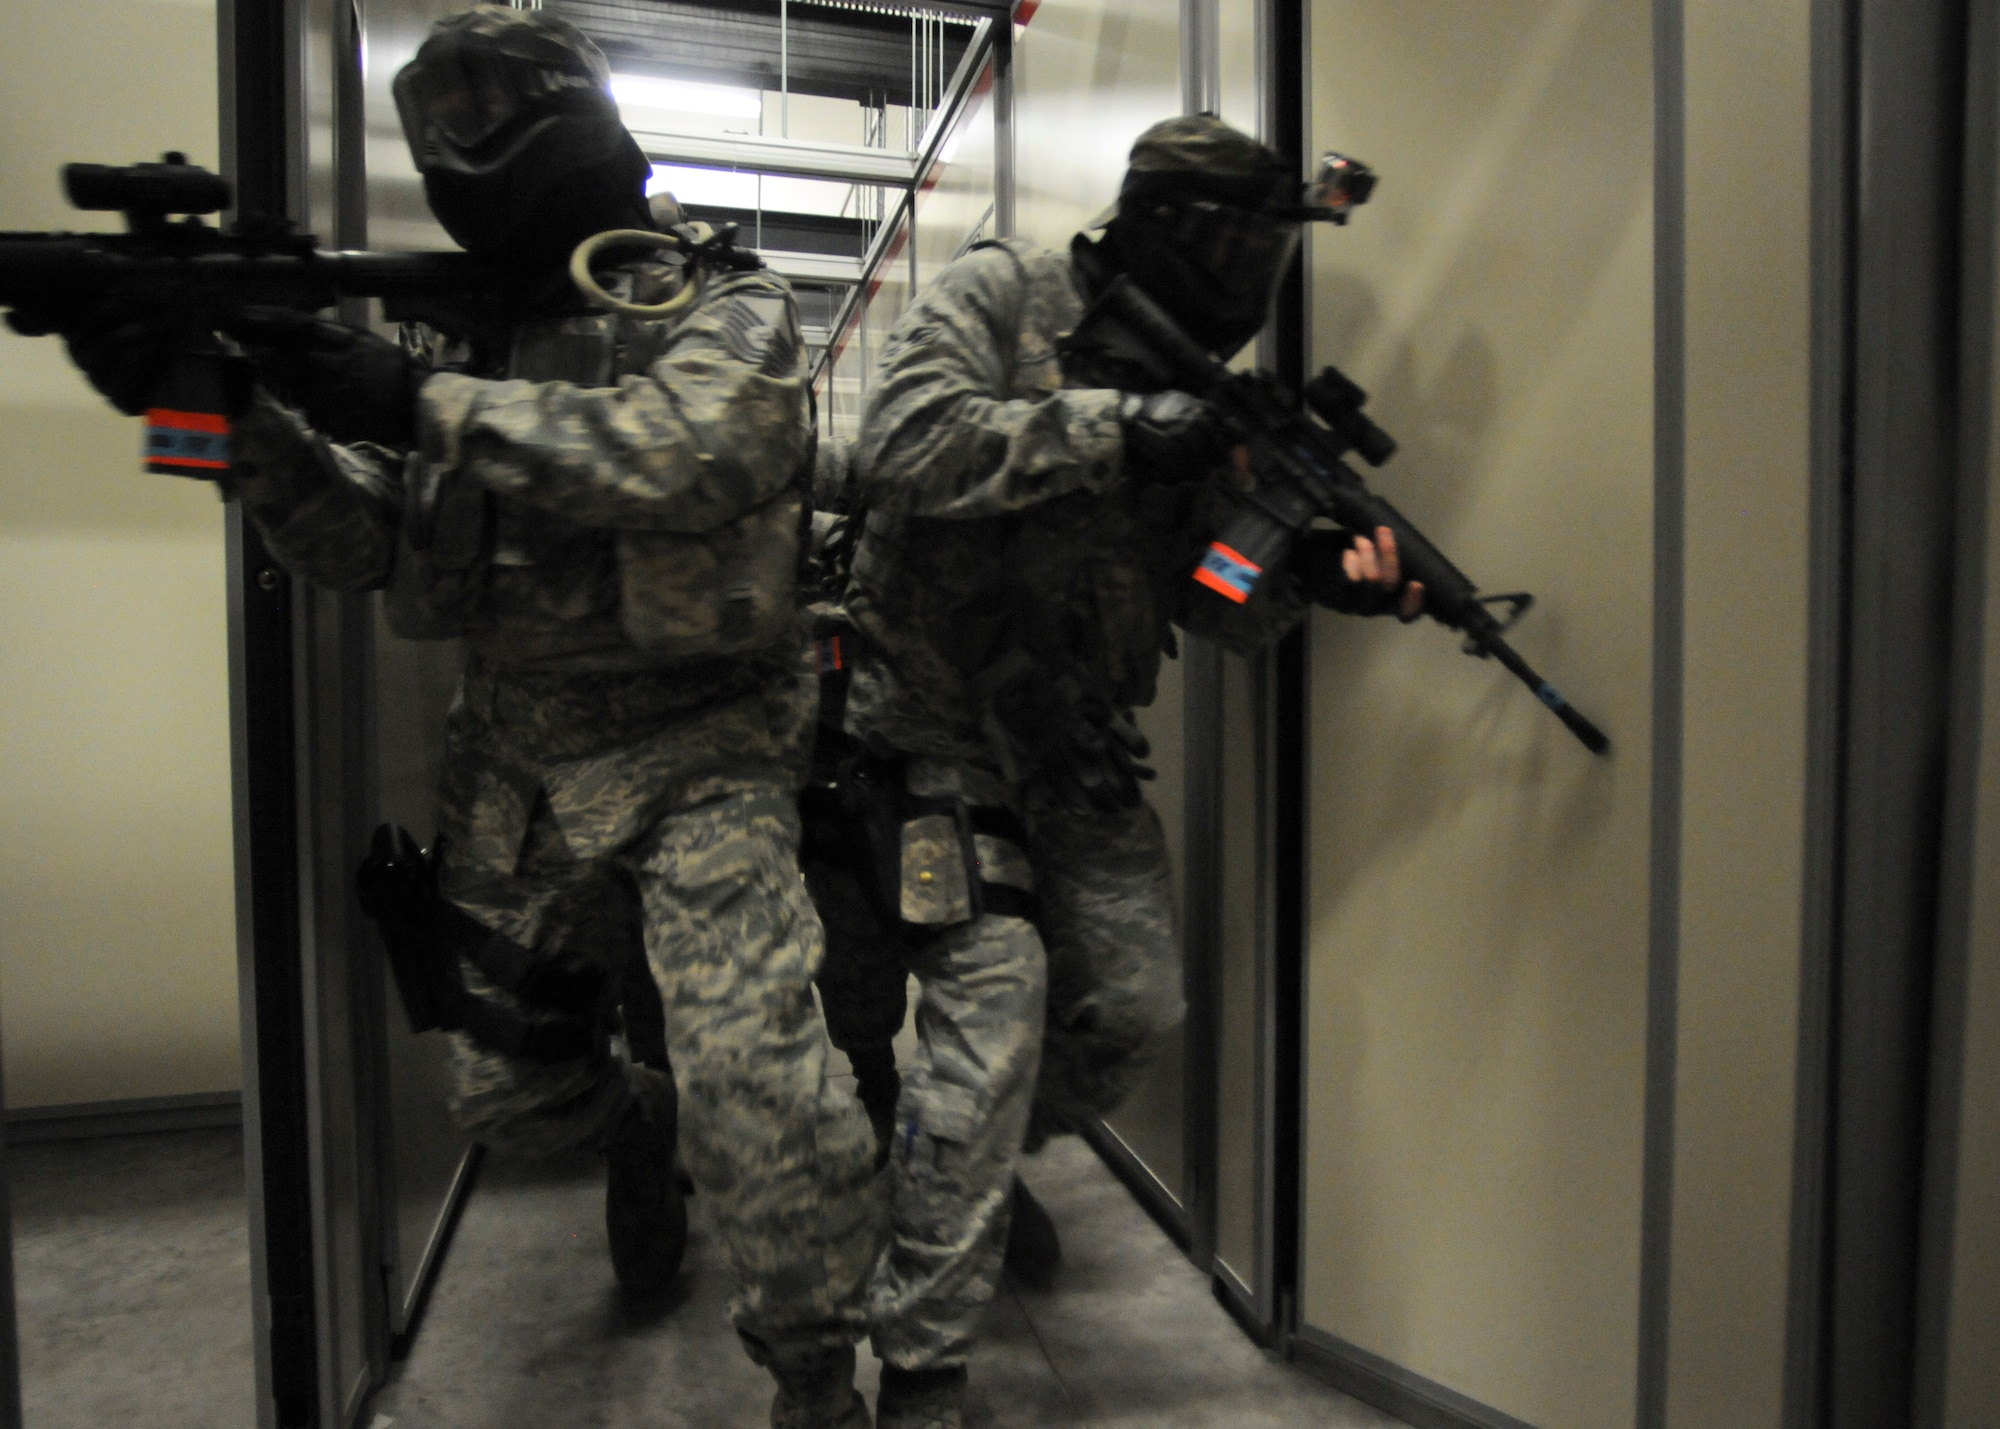 Members of the 125th Security Forces Squadron perform close quarters combat training at Camp Blanding Joint Training Base, Fla. on Apr. 11, 2014. (U.S. Air National Guard photo by Staff Sgt. Jeremy L. Brownfield) (Released)